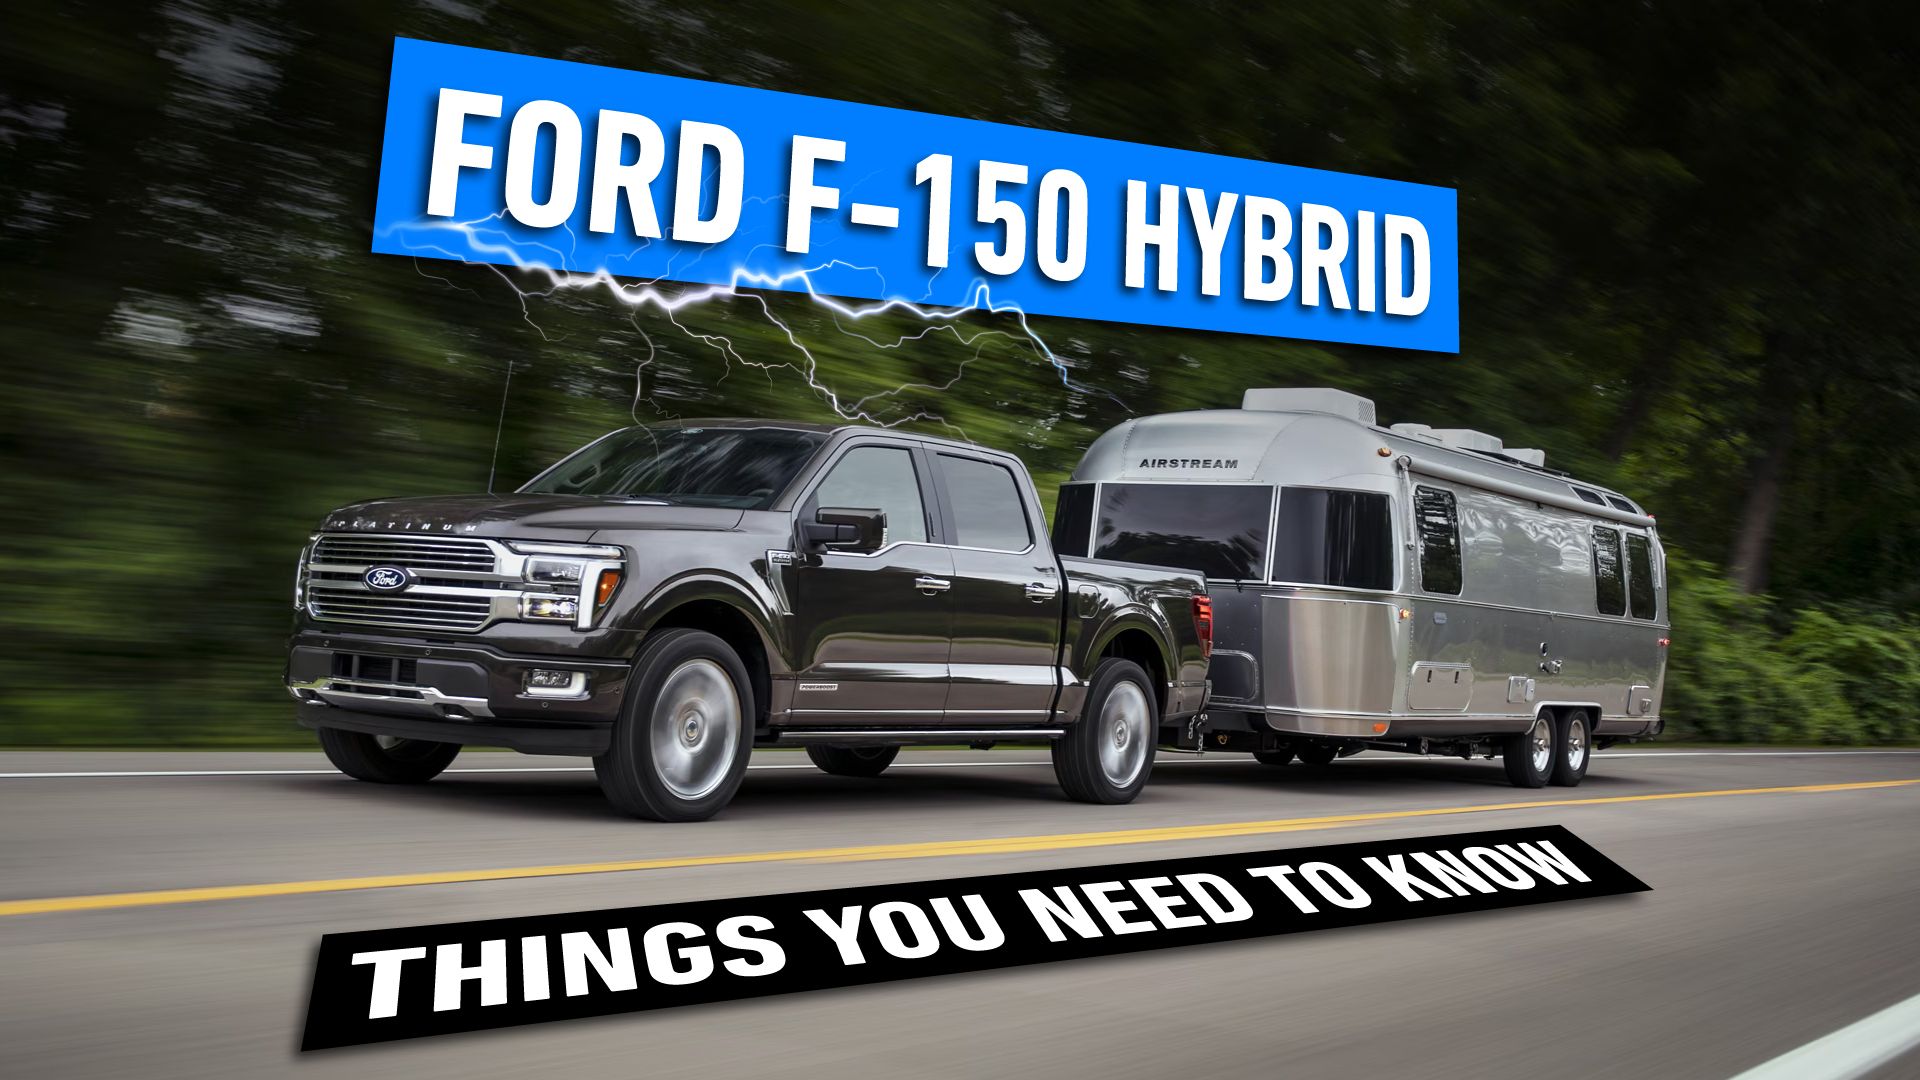 Ford F-150 Hybrid Towing